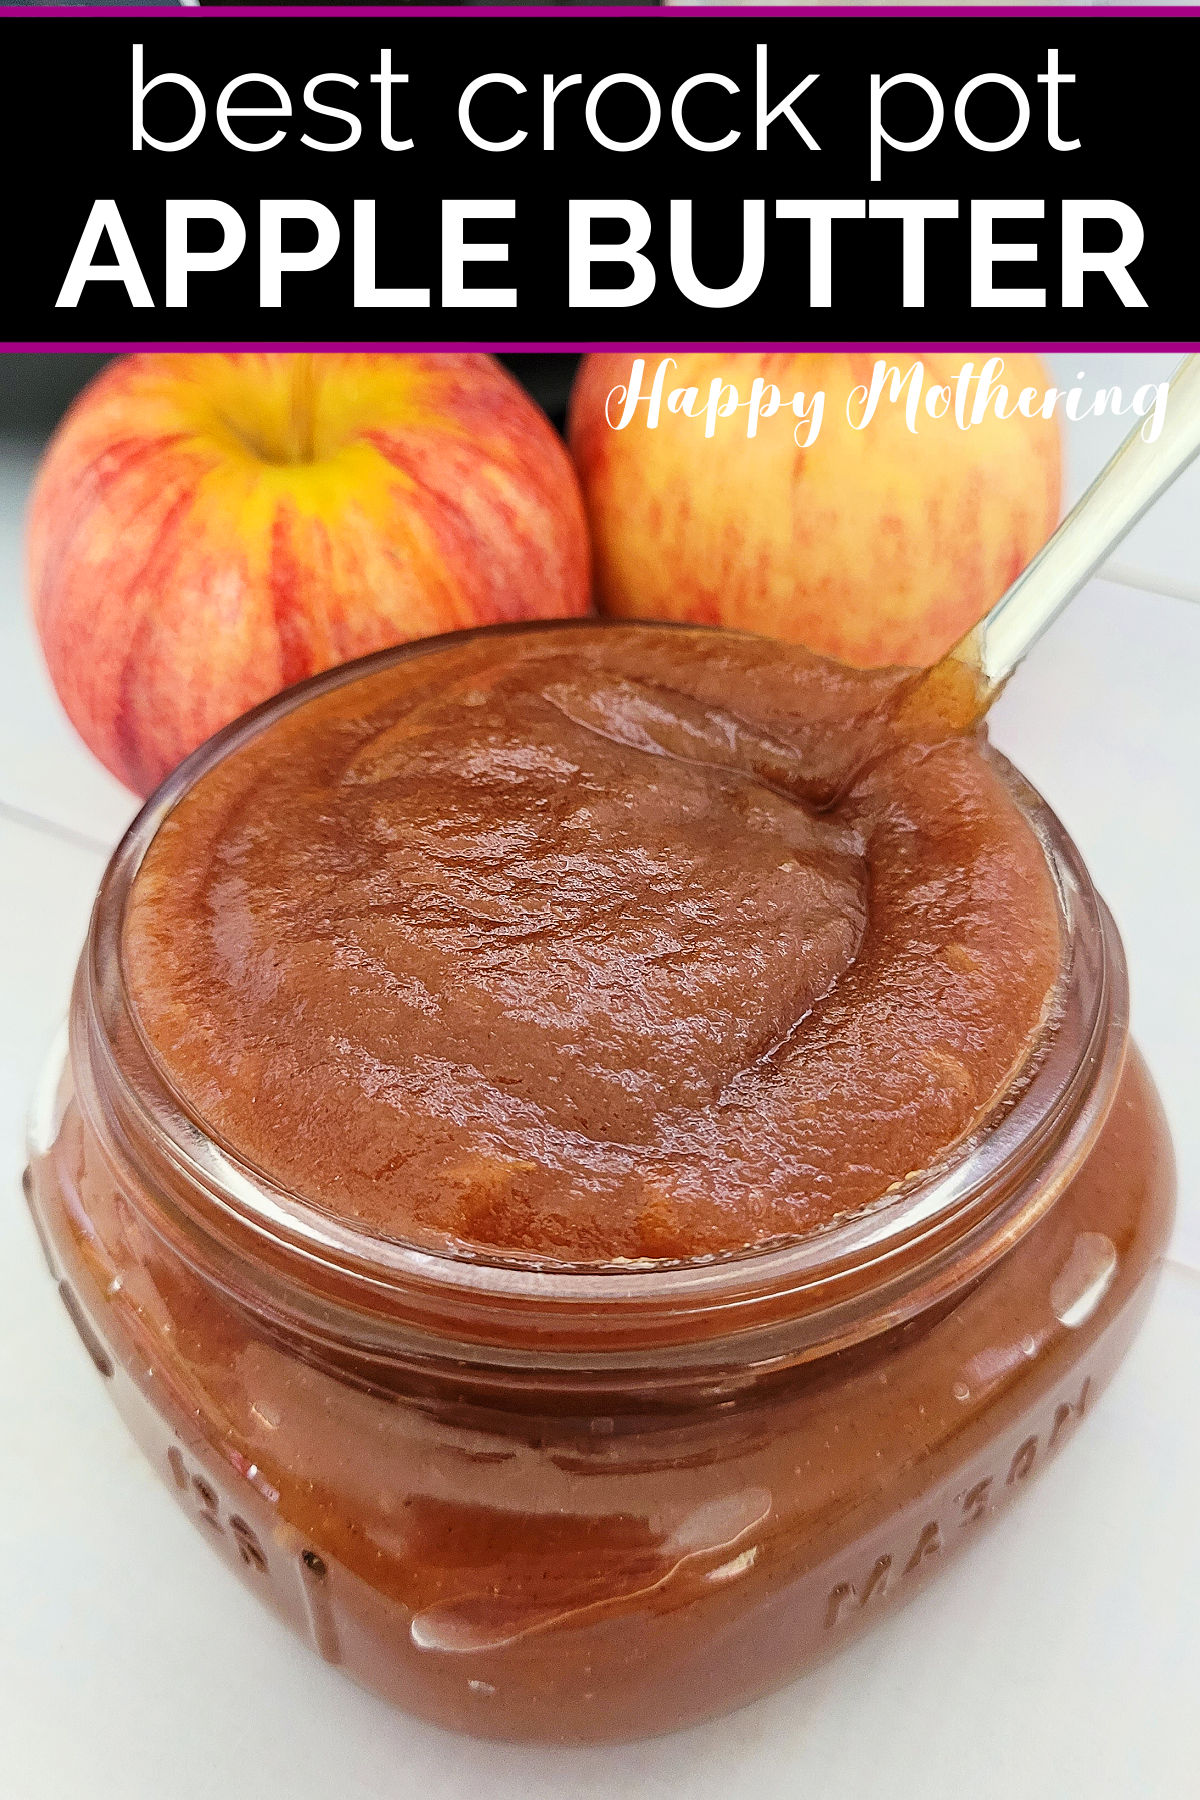 A spoon in a half pint jar of homemade apple butter with fresh apples in the background.